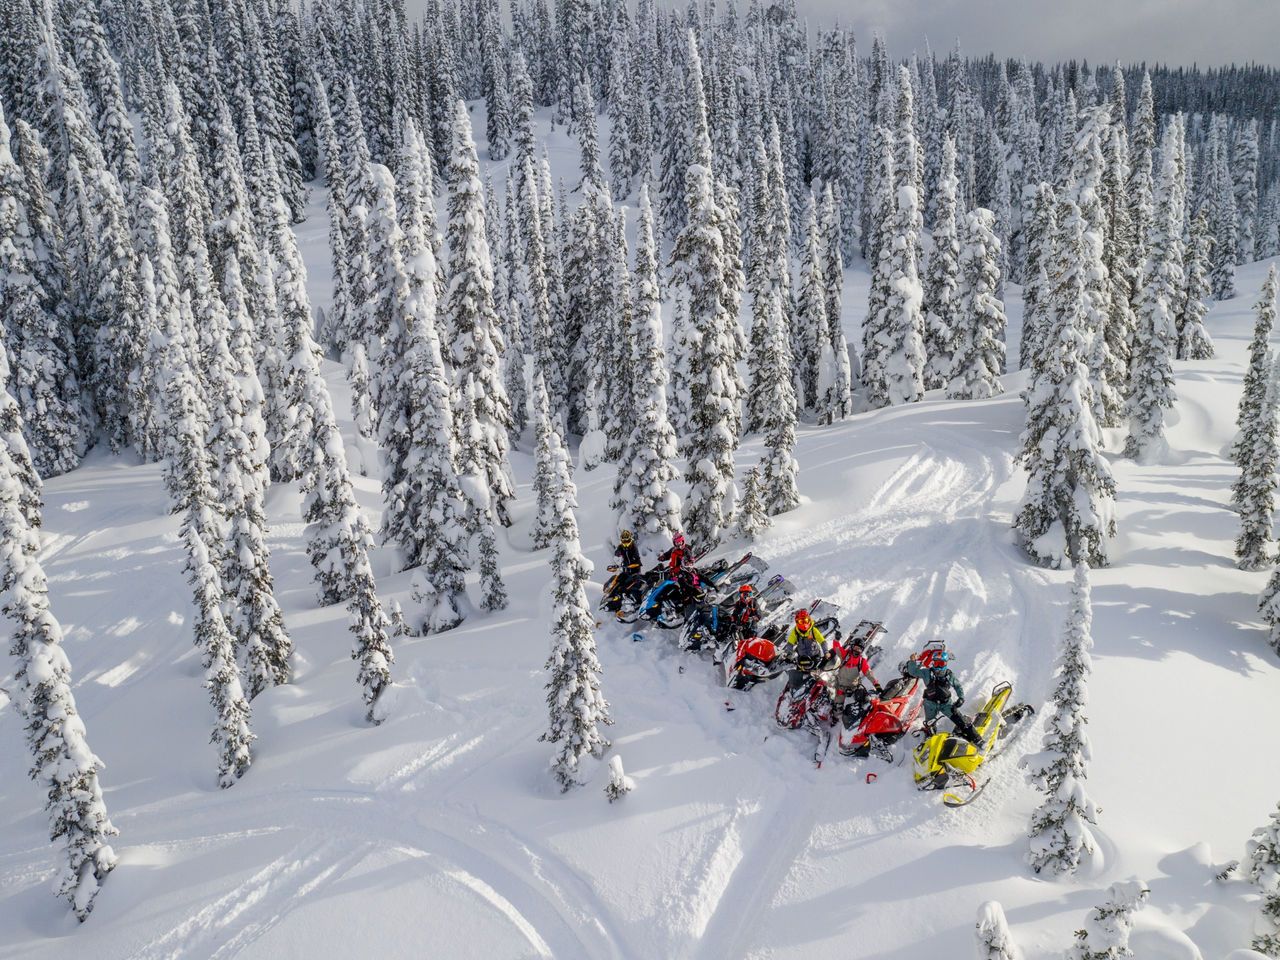 Up your skills on this women-only Ski-Doo riding clinic, Sicamous, BC